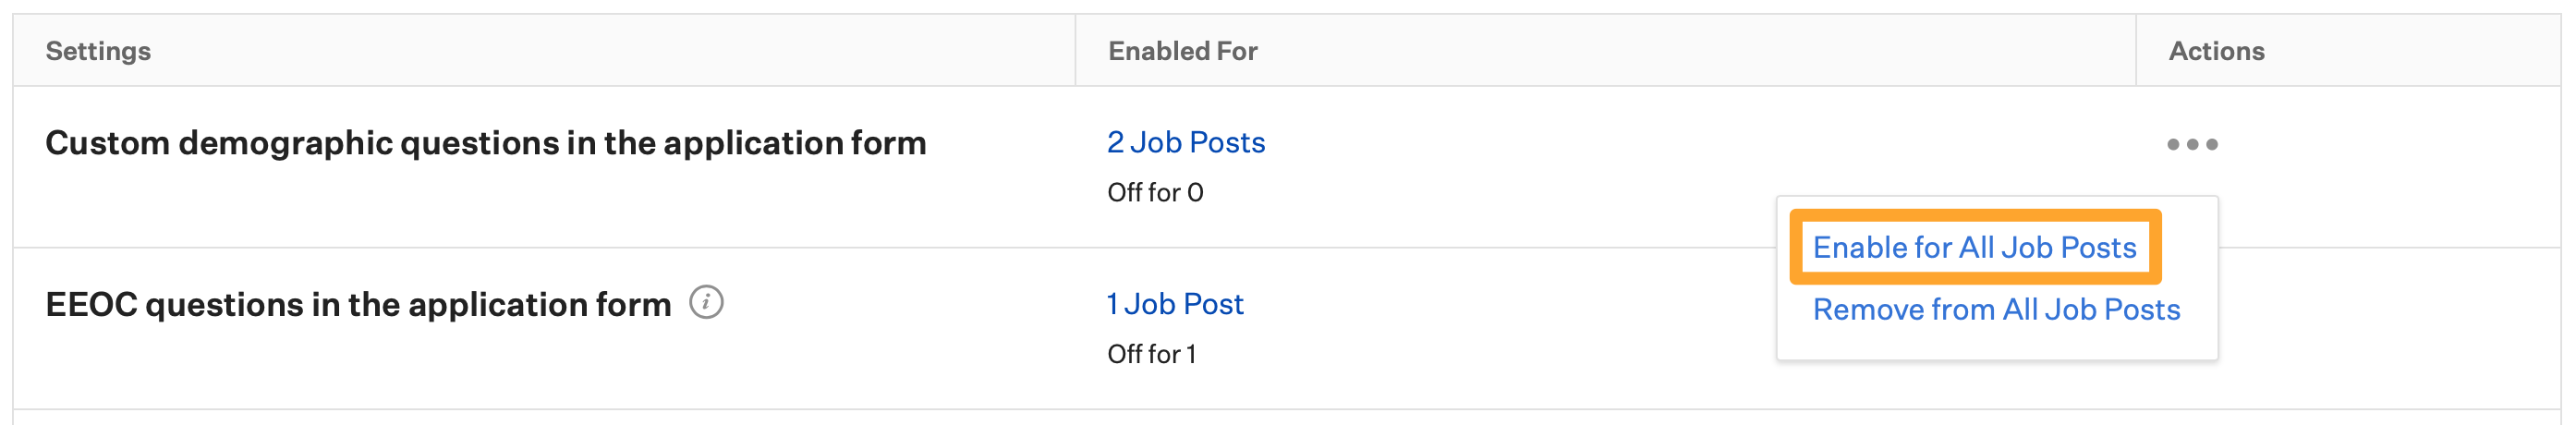 Custom_demographic_questions___Enable_for_all_job_posts.png